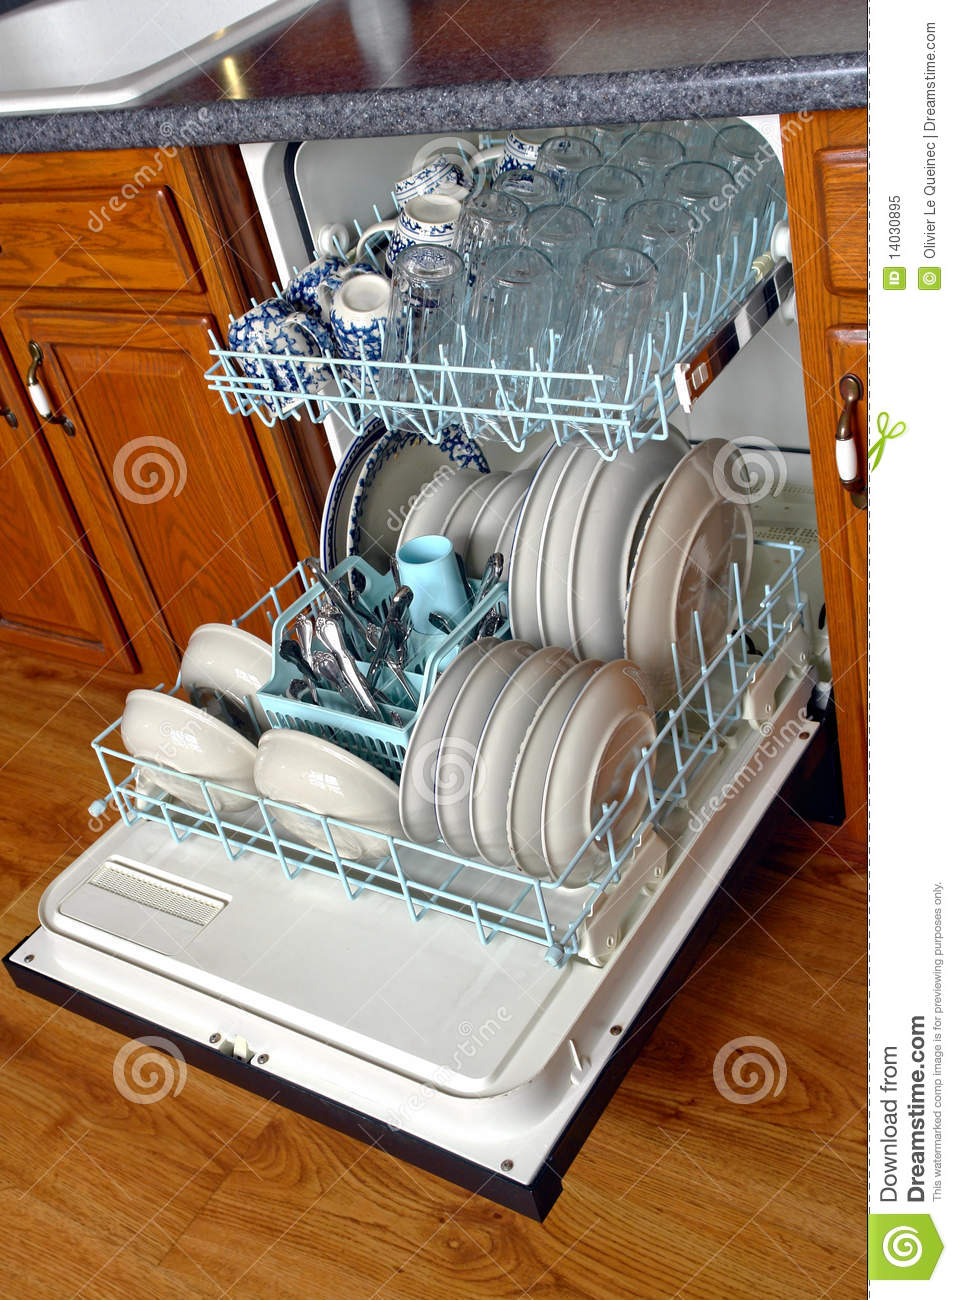 Open House Kitchen Dishwasher Full Of Dirty Dishes Royalty Free Stock